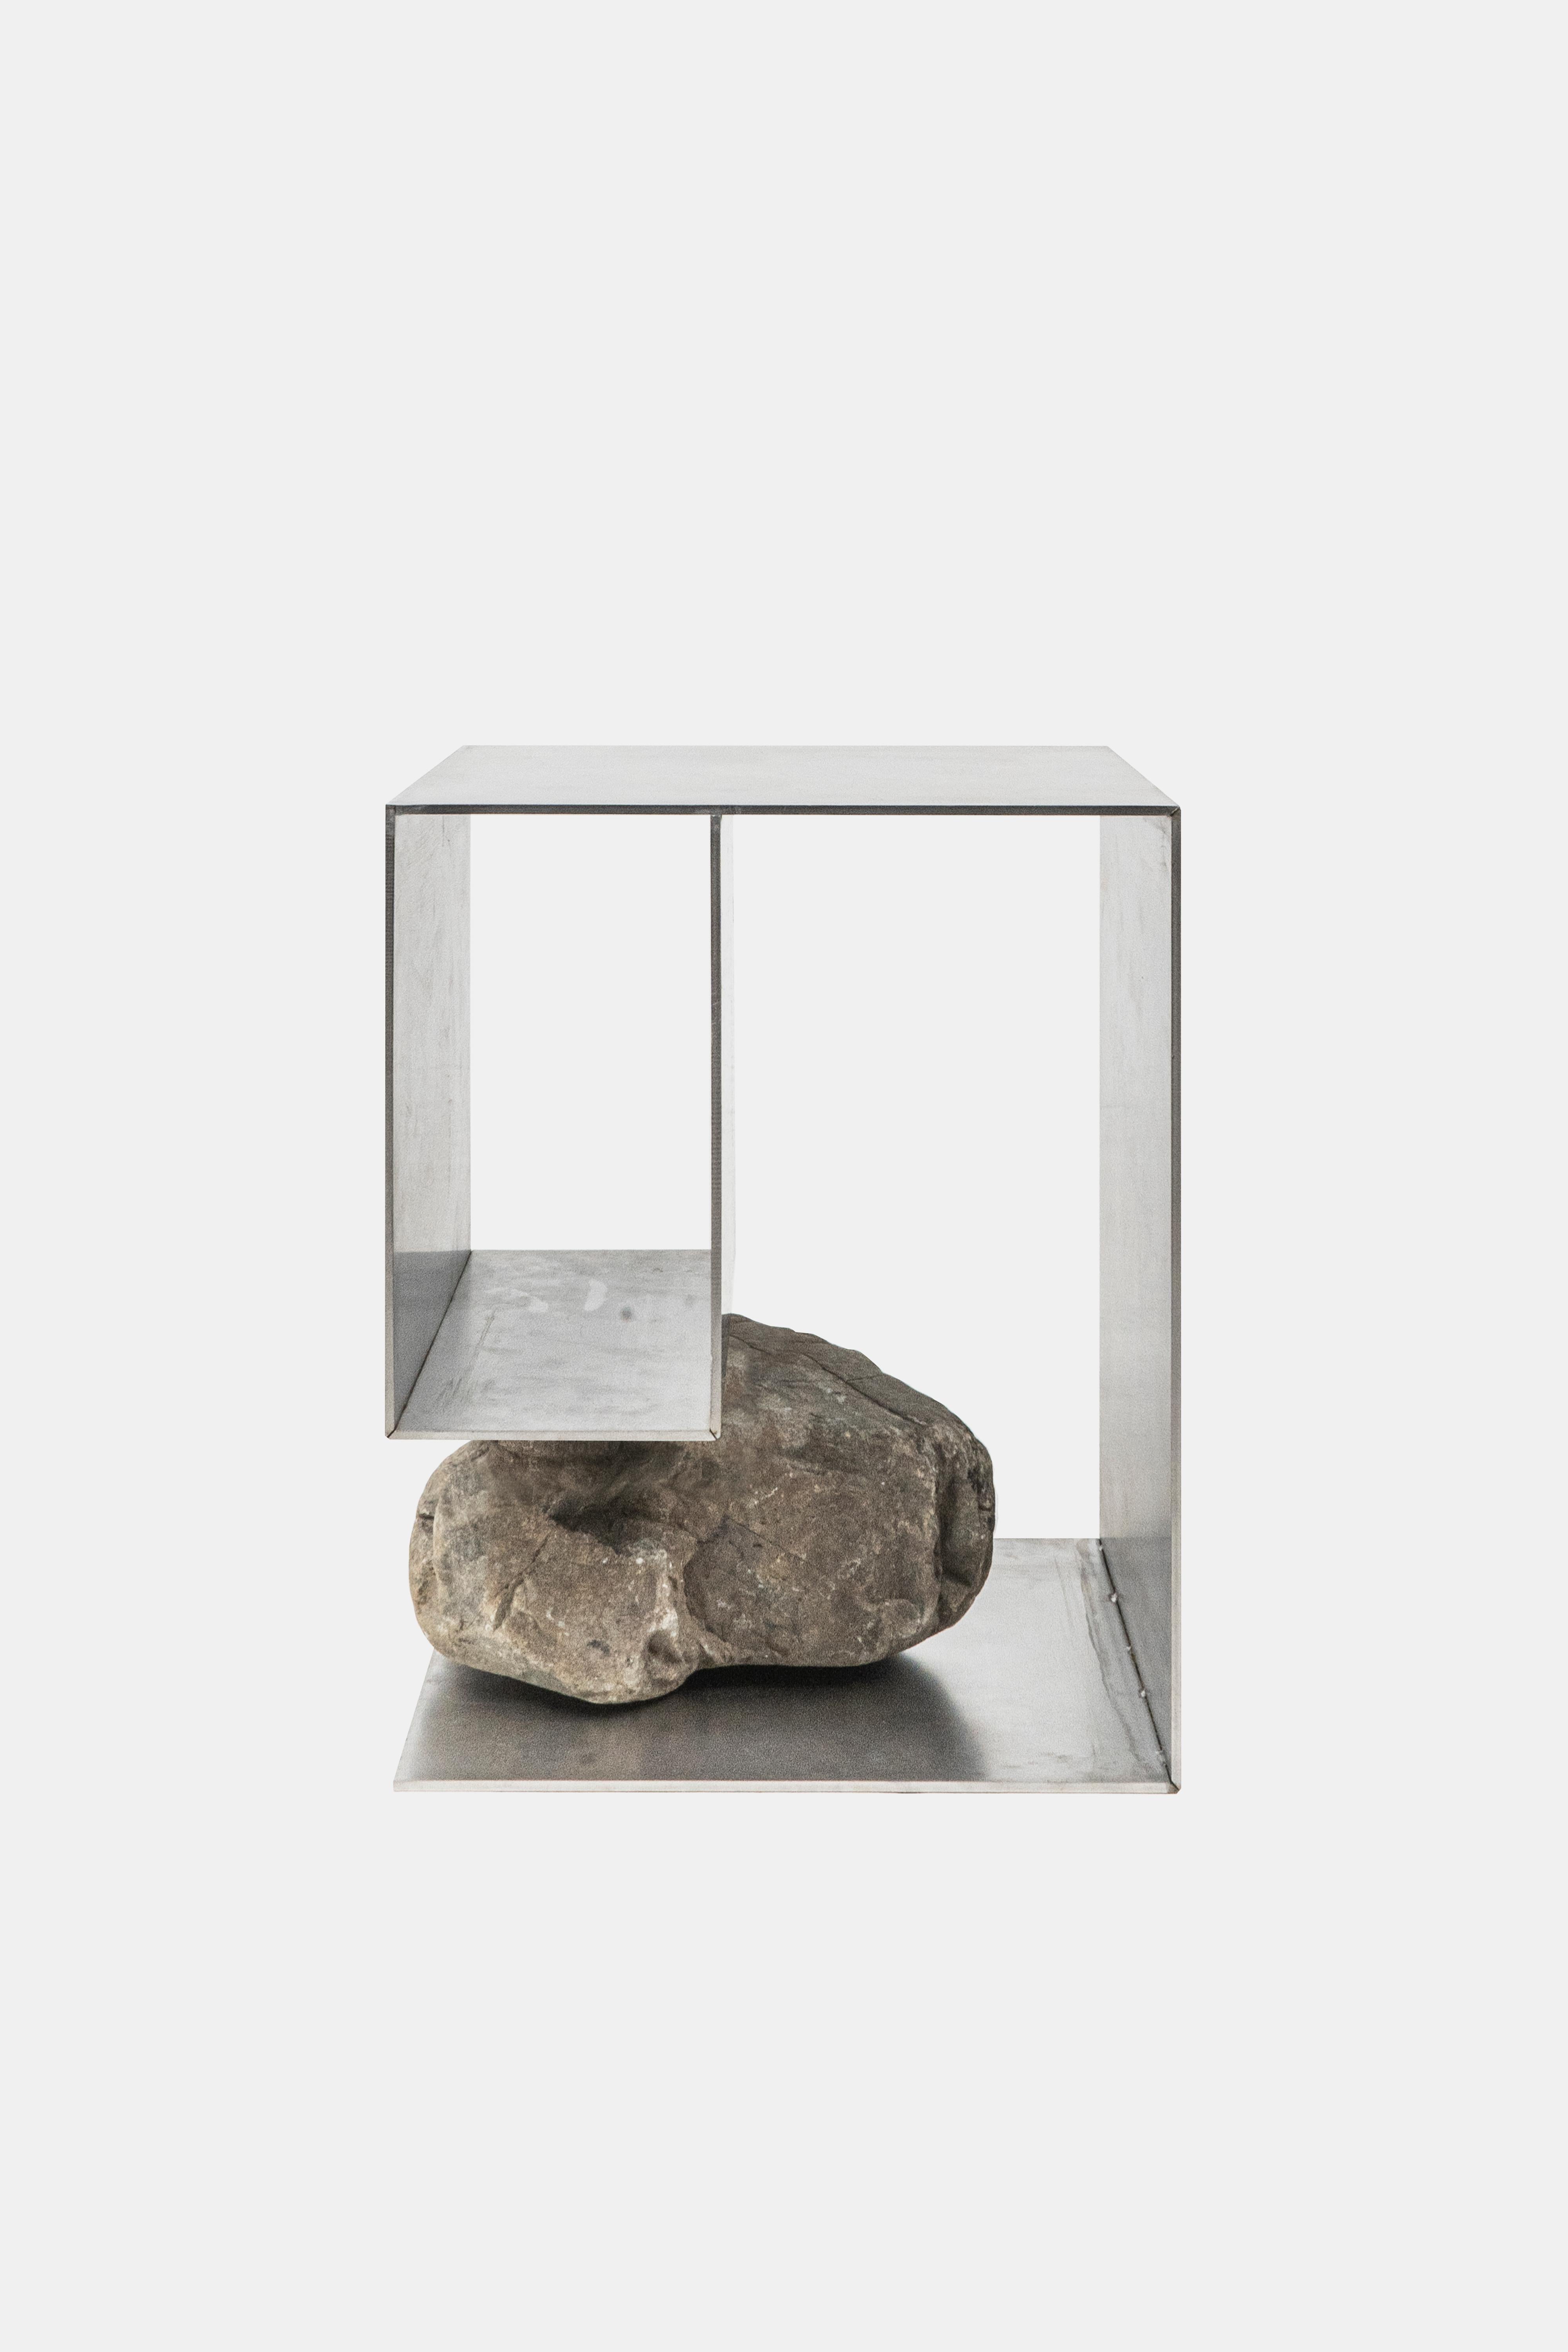 Proportions of stone stool 02 by Lee Sisan.
2019.
Dimensions: W 36 x D 36 x H 45 cm.
Materials: Stainless steel, natural stone.

Each piece is made to order and uses natural stones, so please expect some variability in design.

